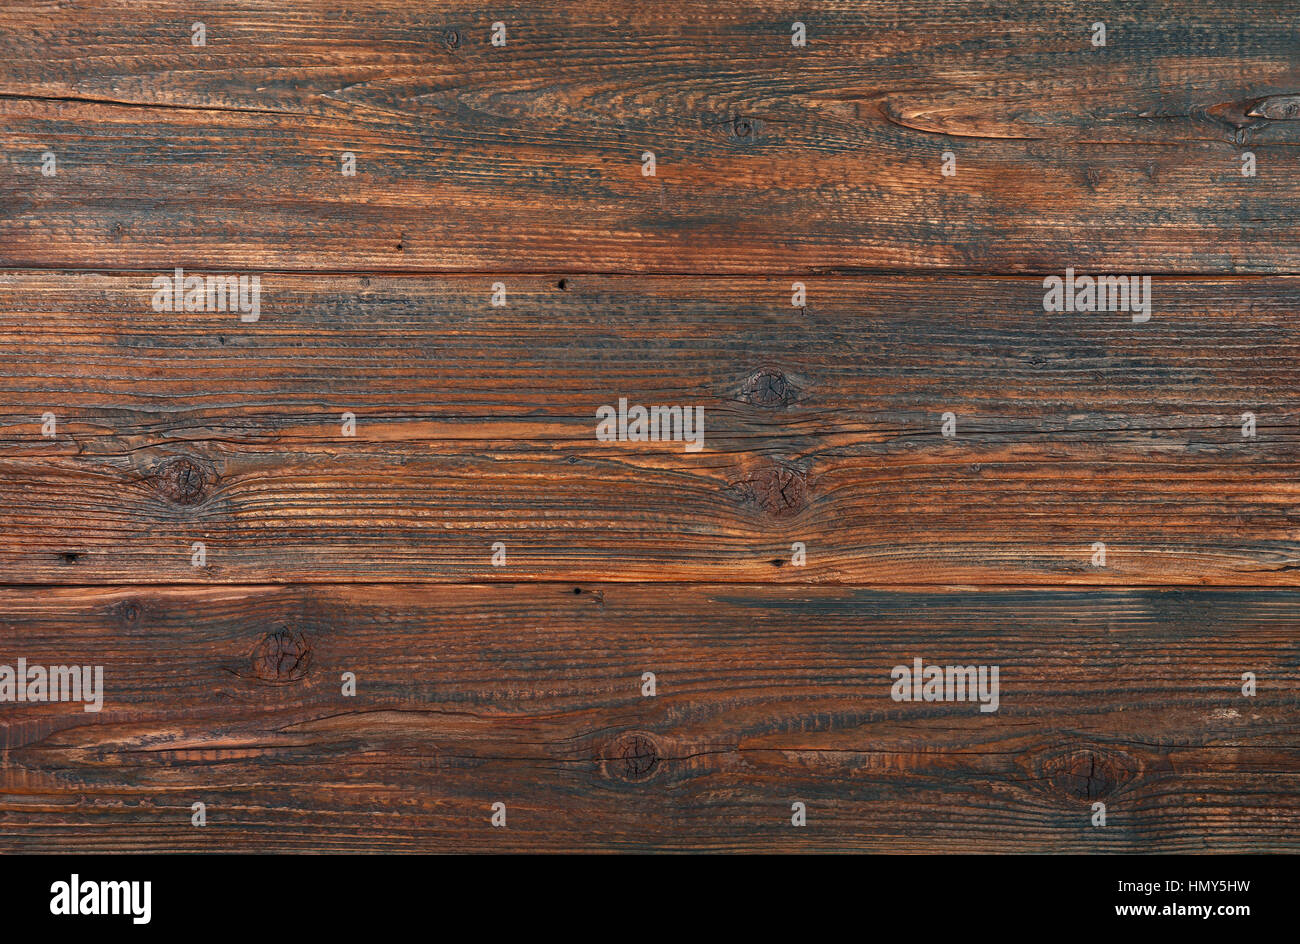 Dark brown old vintage knotty wooden wide planks wall background texture Stock Photo